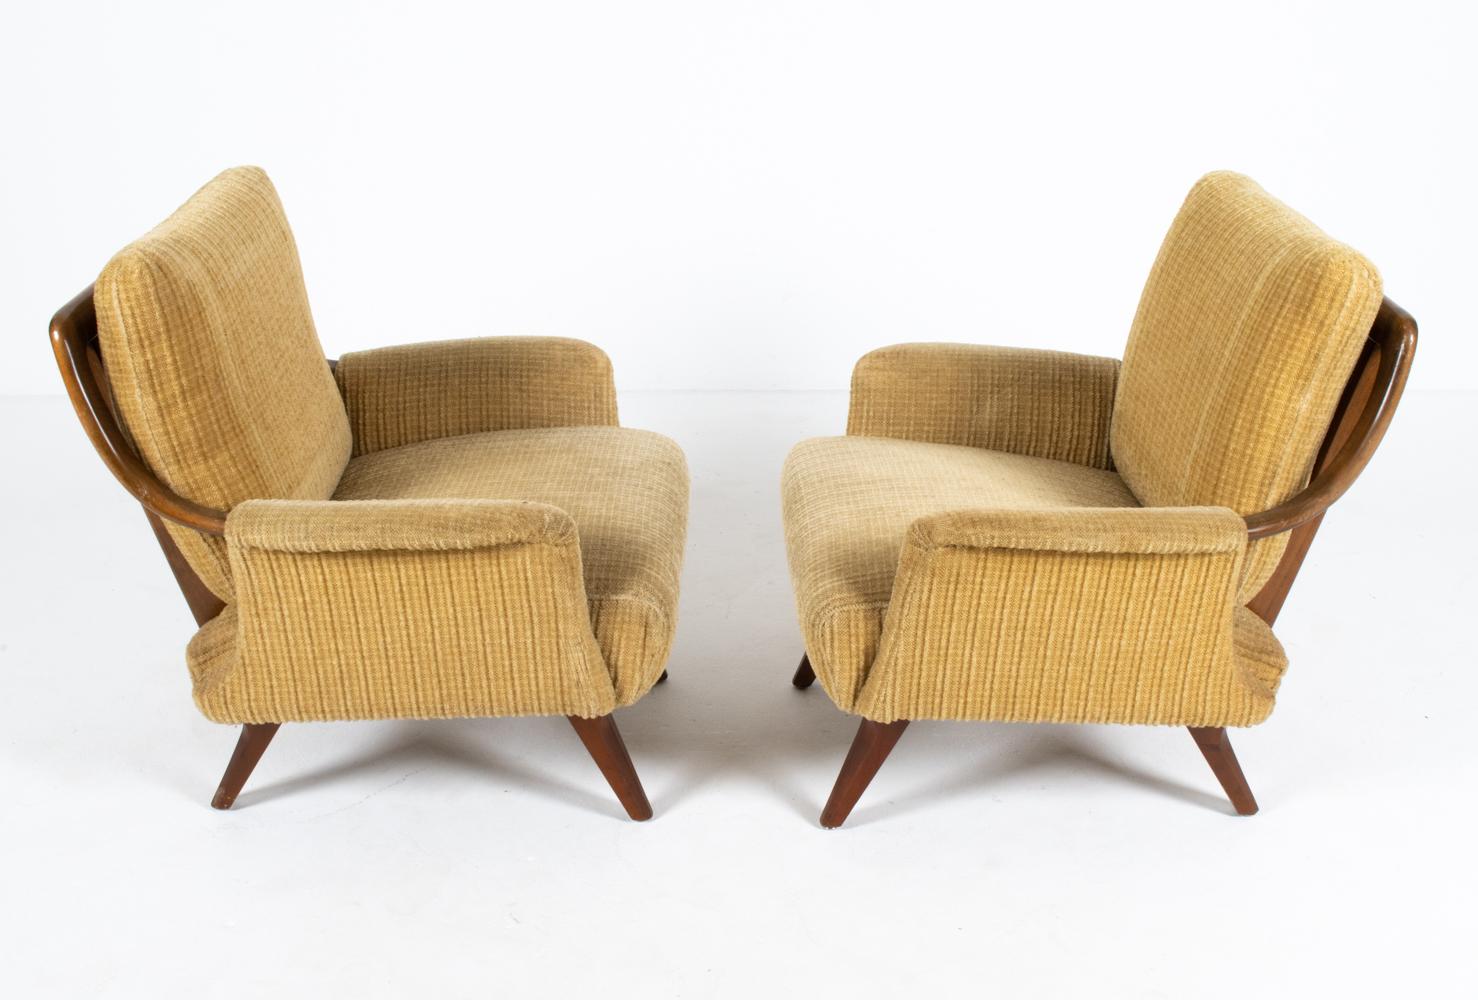 Pair of Scandinavian Mid-Century Lounge Chairs, c. 1950's For Sale 6